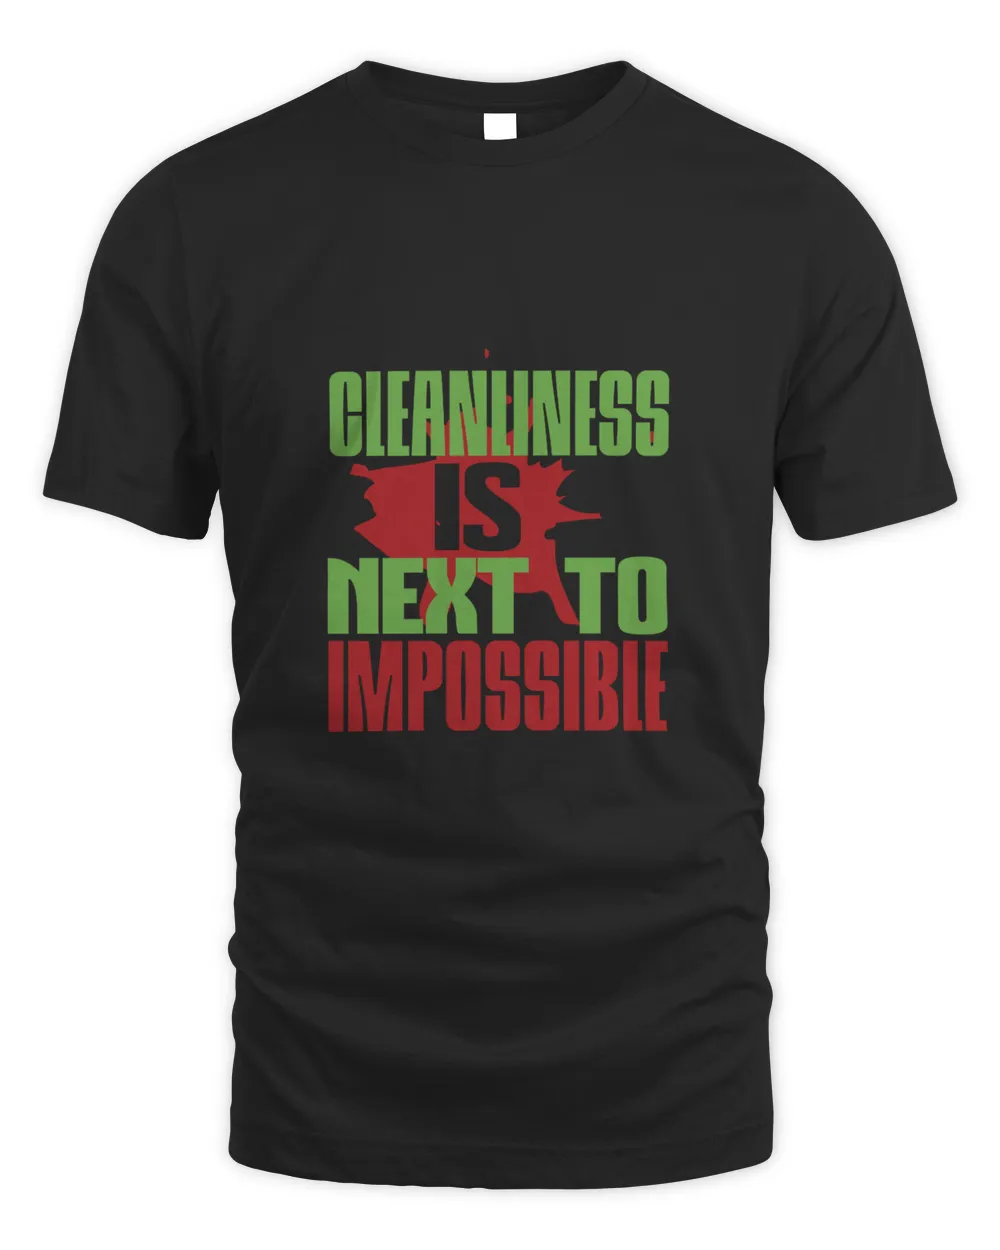 Cleanliness Is Next To Impossible, Cleaner Shirt, Cleaner Gifts, Cleaner, Cleaner Tshirt, Funny Gift For Cleaner